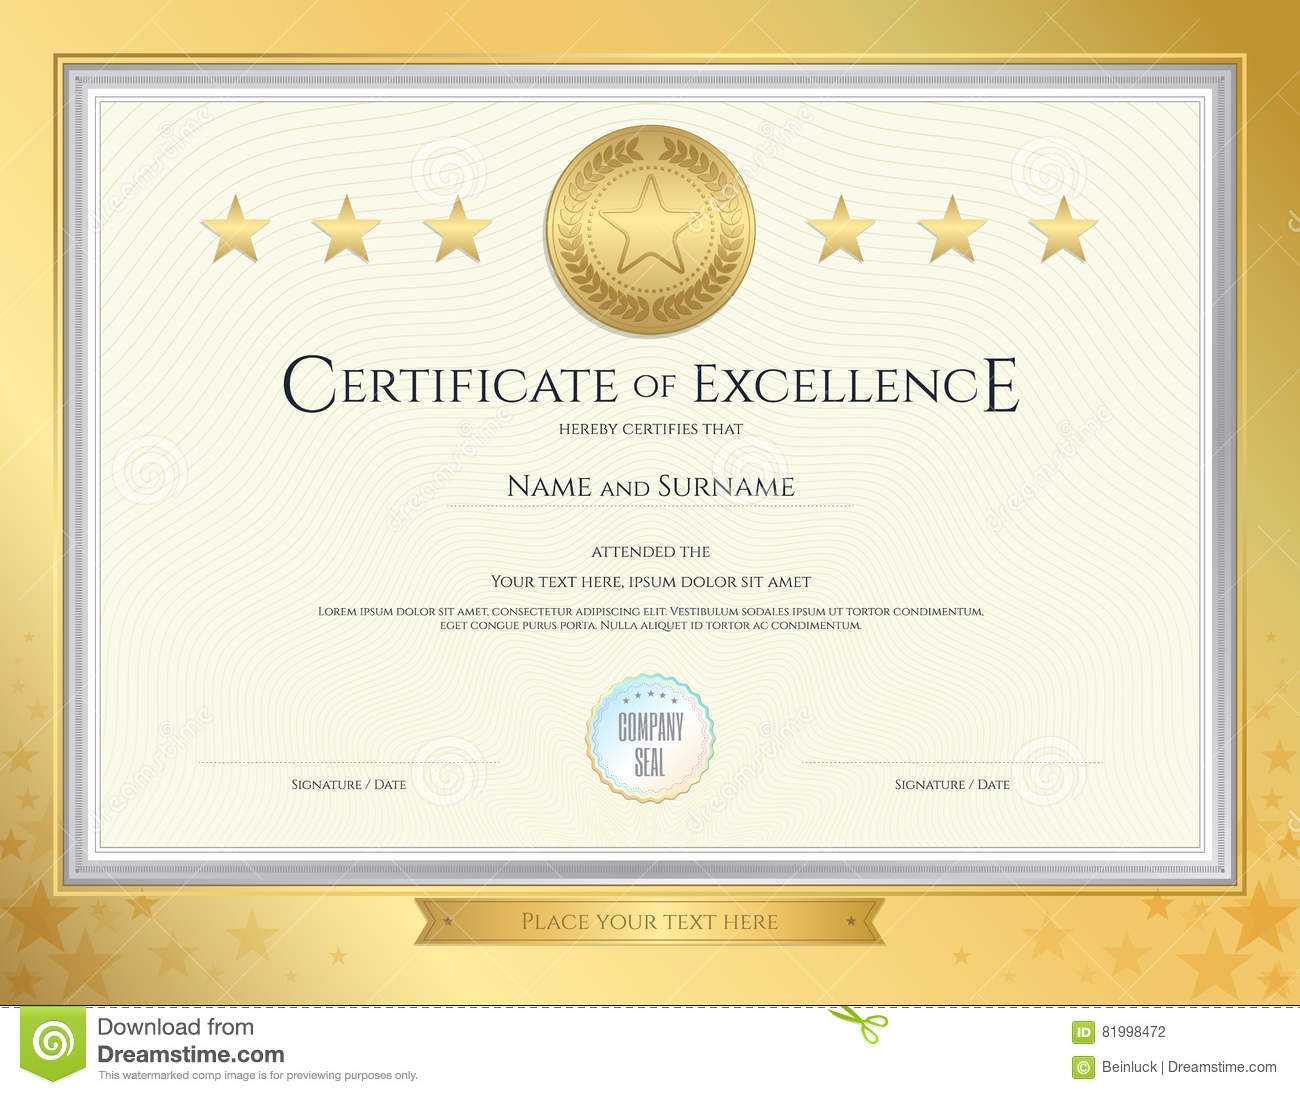 Elegant Certificate Template For Excellence, Achievement With Regard To Elegant Certificate Templates Free